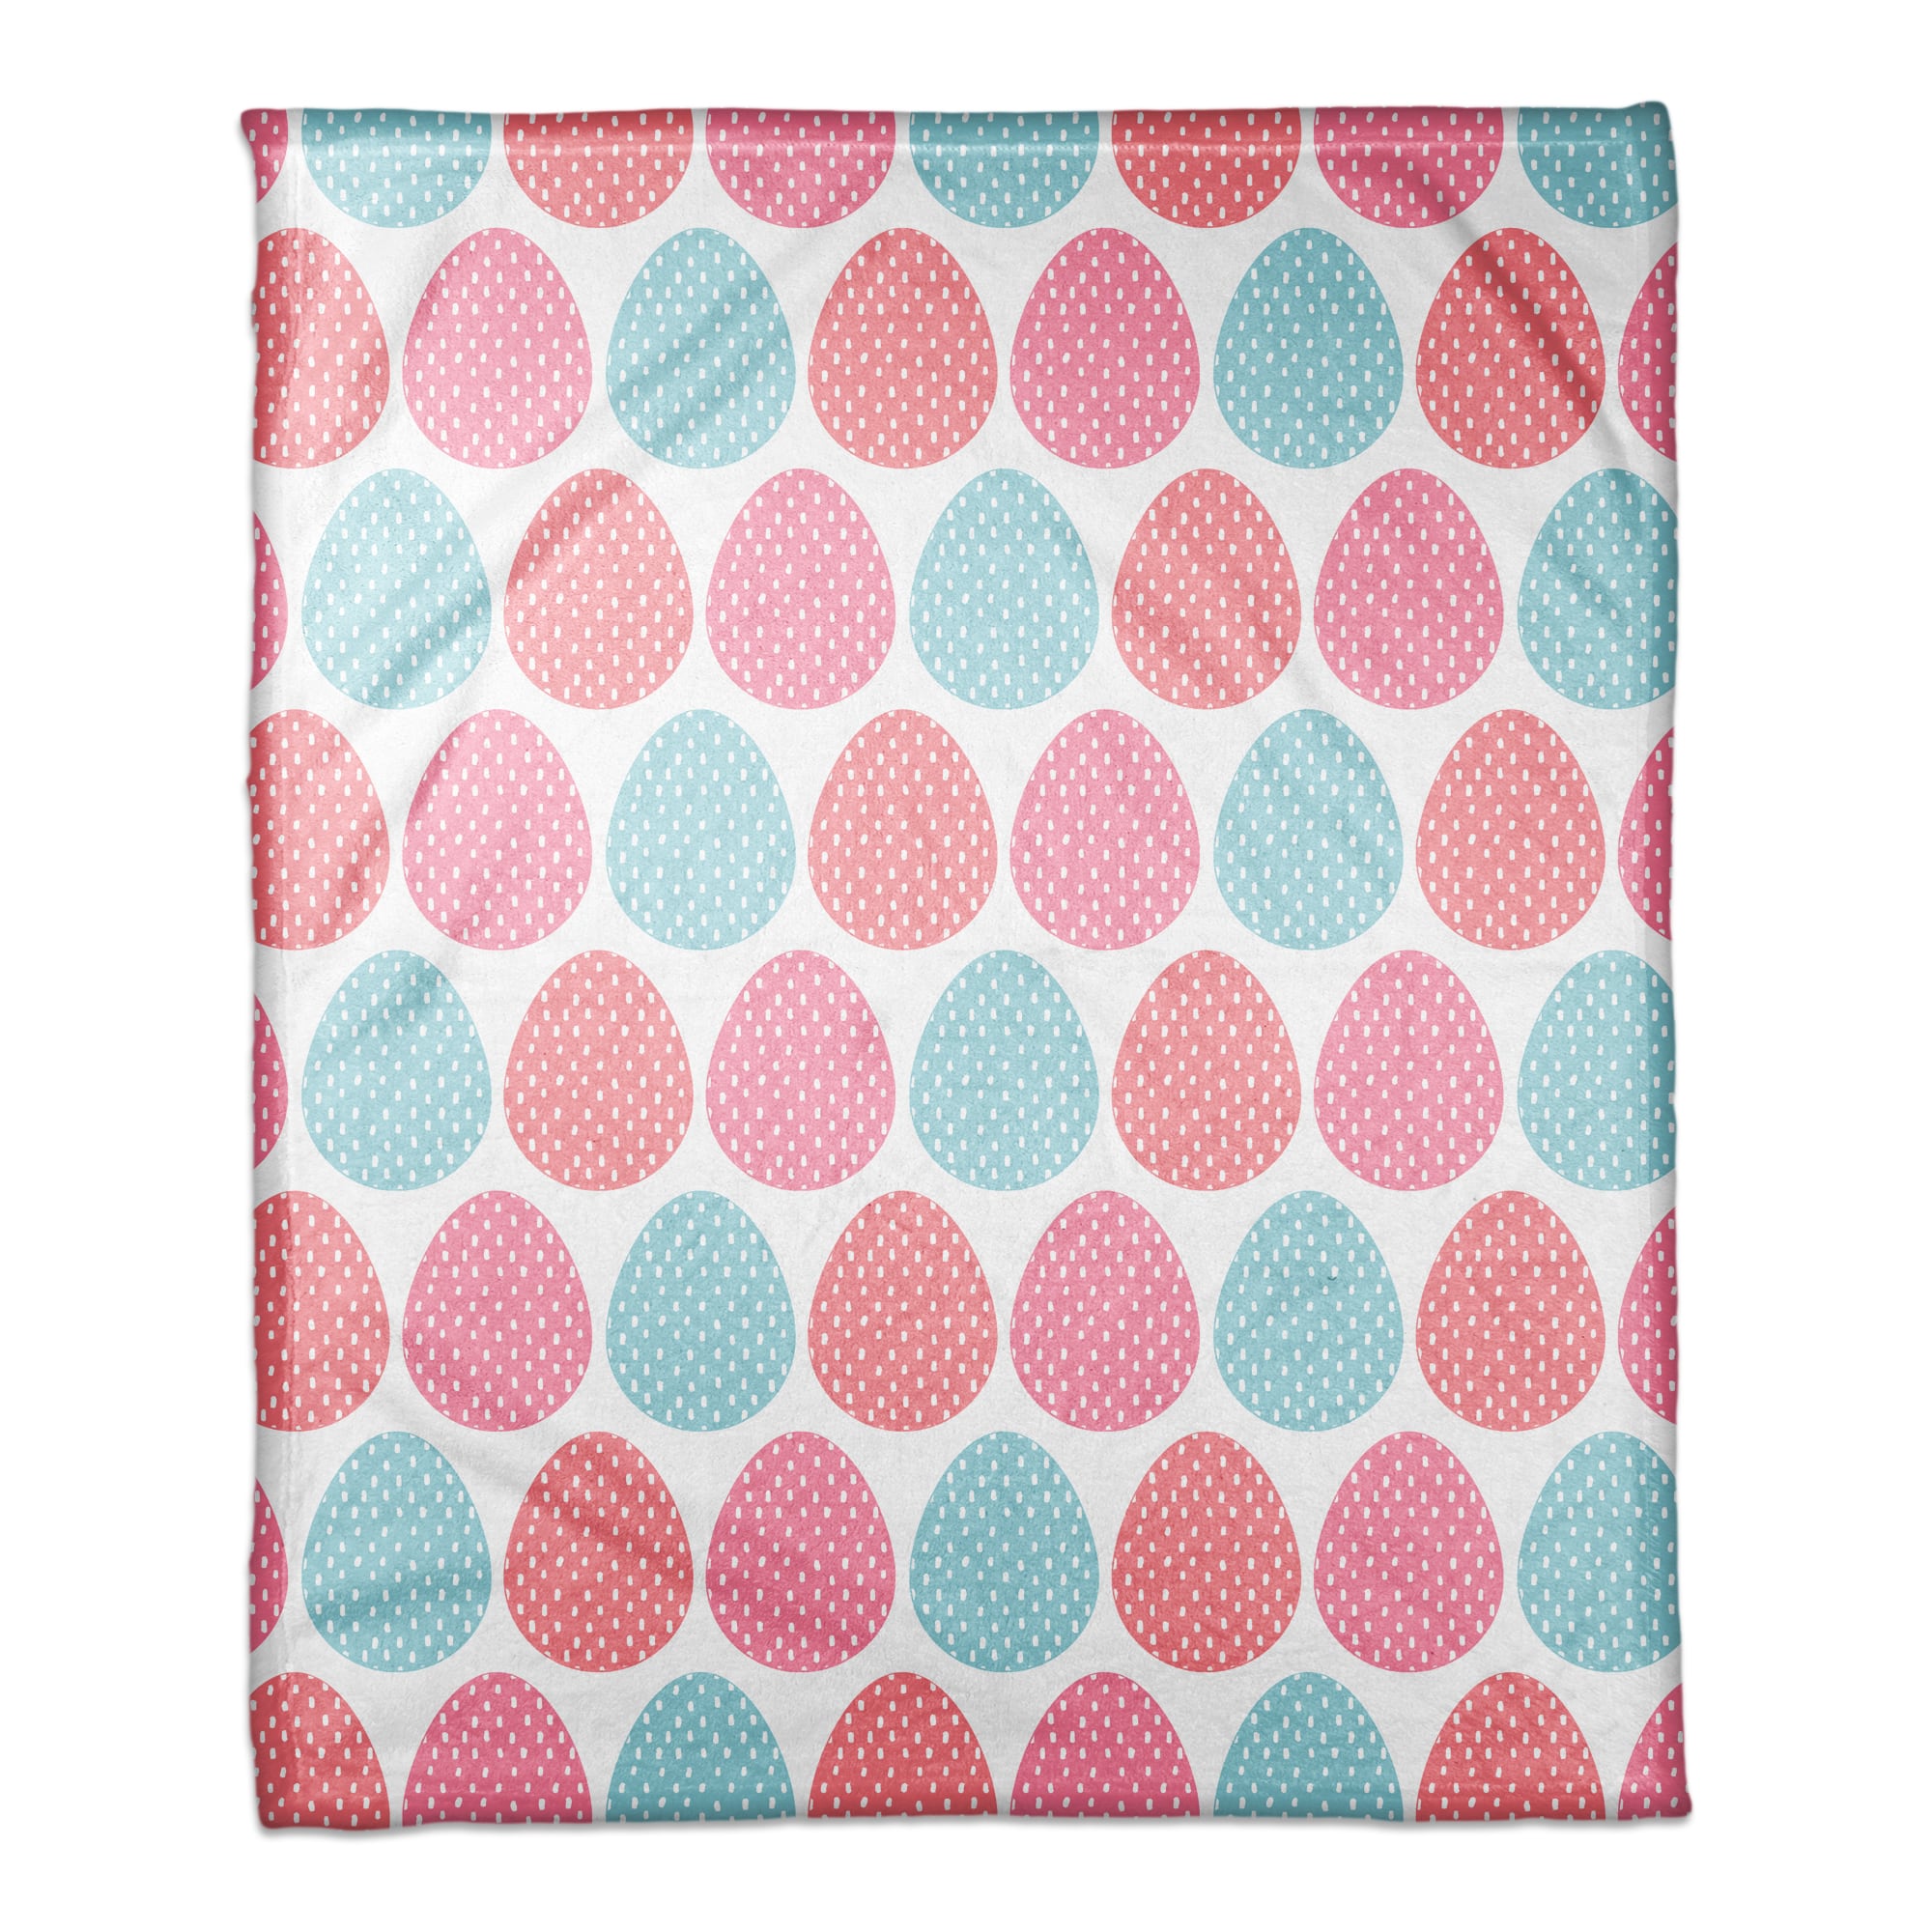 Colorful Dotted Easter Eggs Throw Blanket